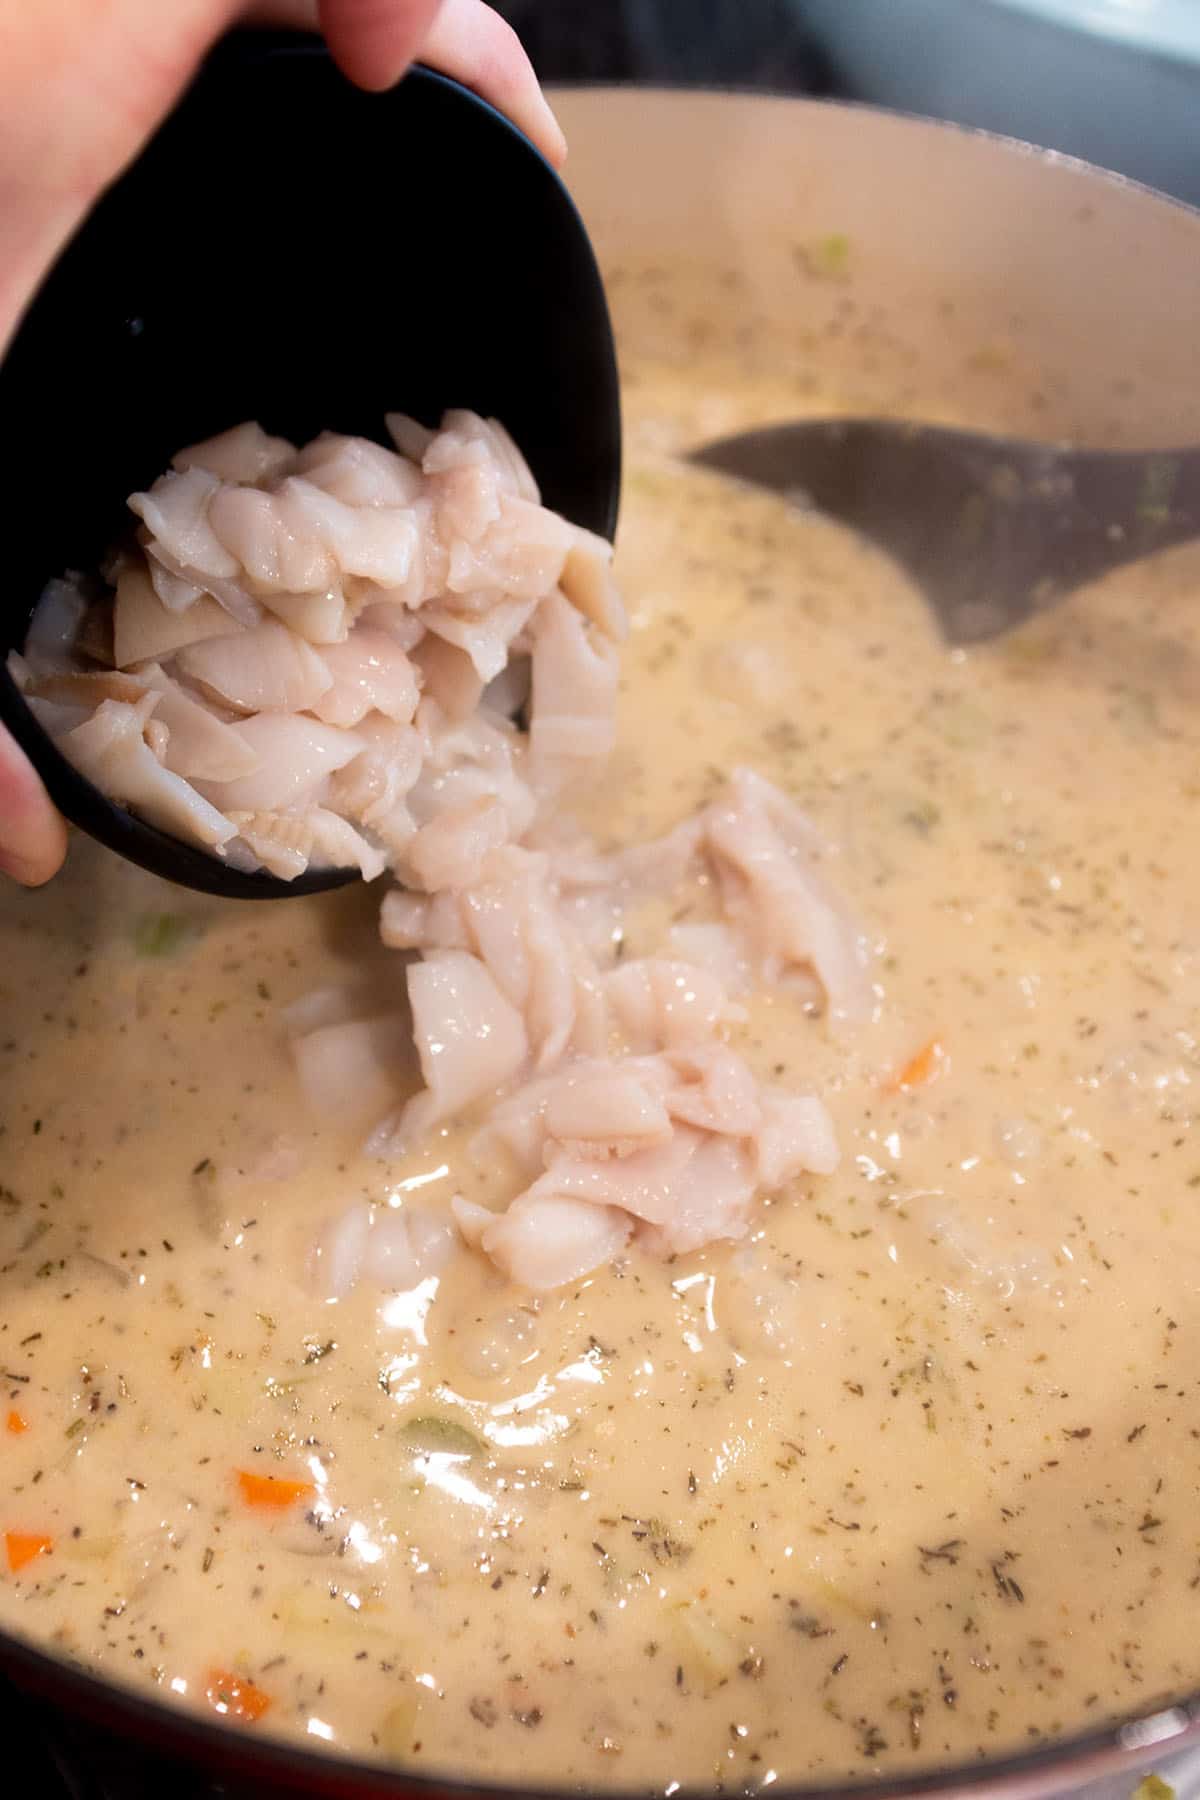 Diced razor clams being added to a potl of chowder.